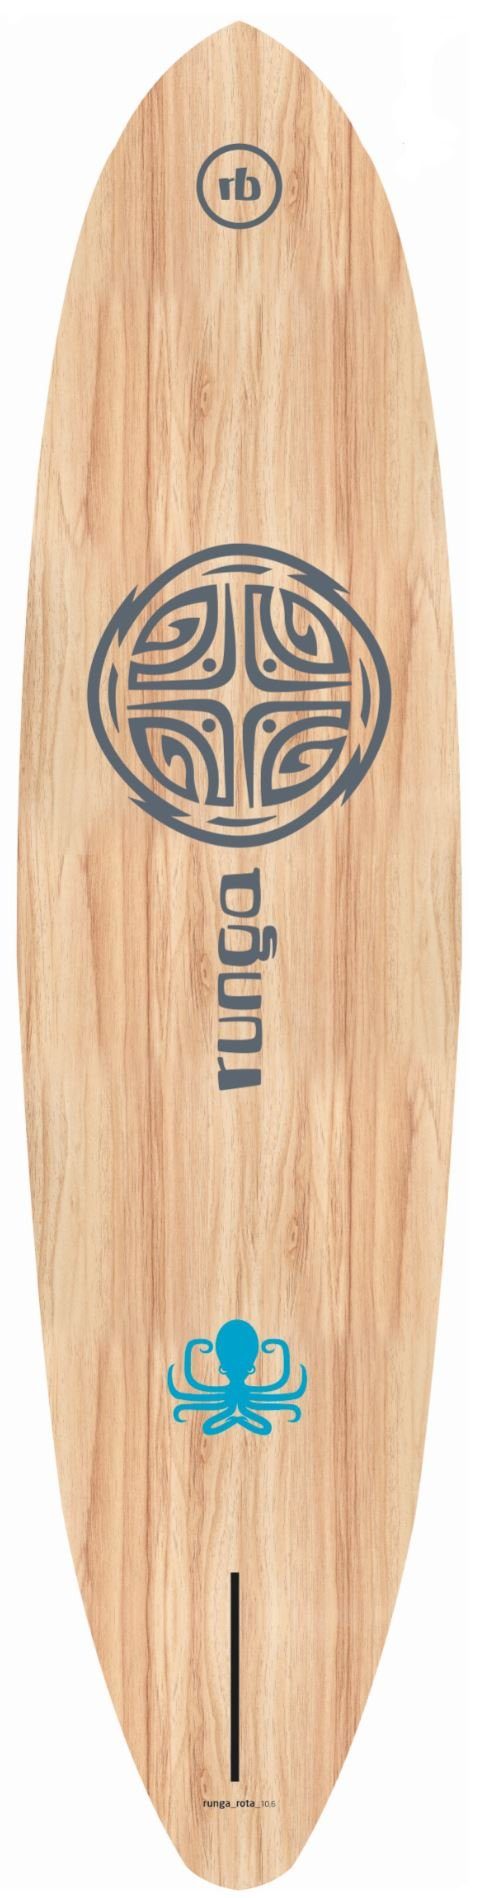 Inkl. SUP-Board Allrounder, Finnen-Set) Paddling Stand (Set BLUE leash coiled SUP, Up Runga-Boards 3-tlg. & ROTA Hard 9.6, Board